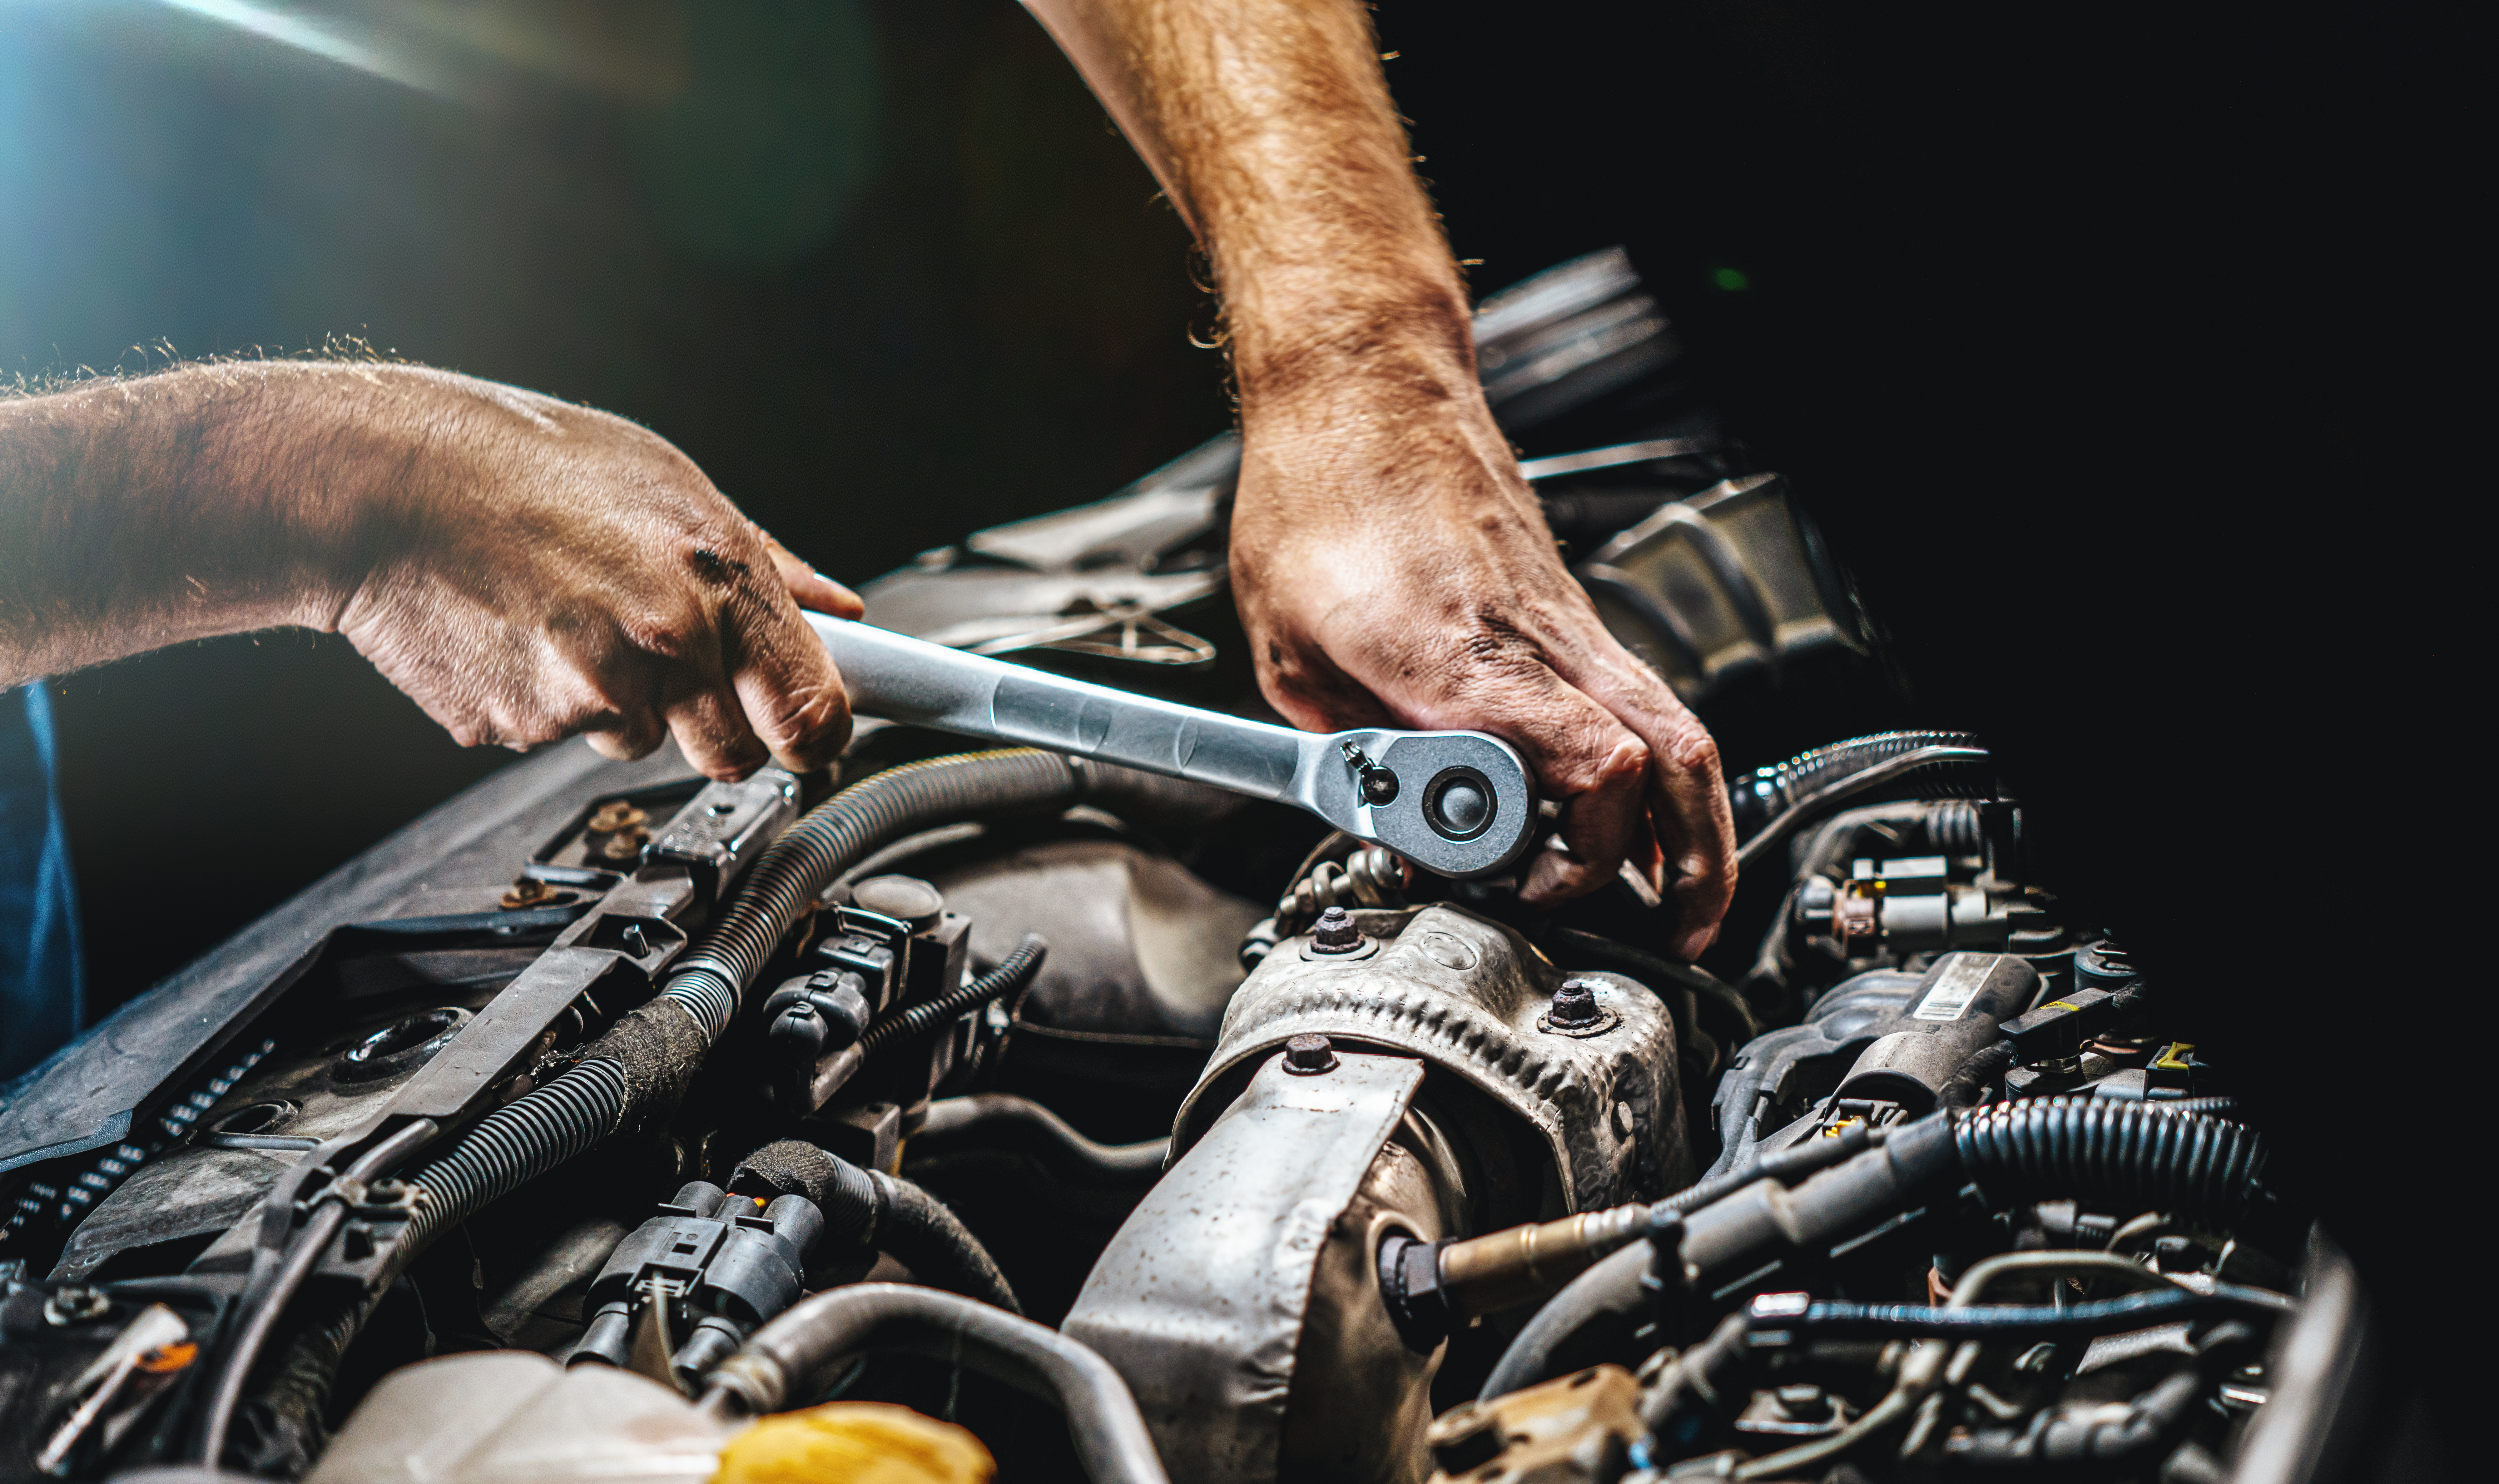 4 Crucial Annual Maintenance Services to Keep Your Vehicle Running Smoothly